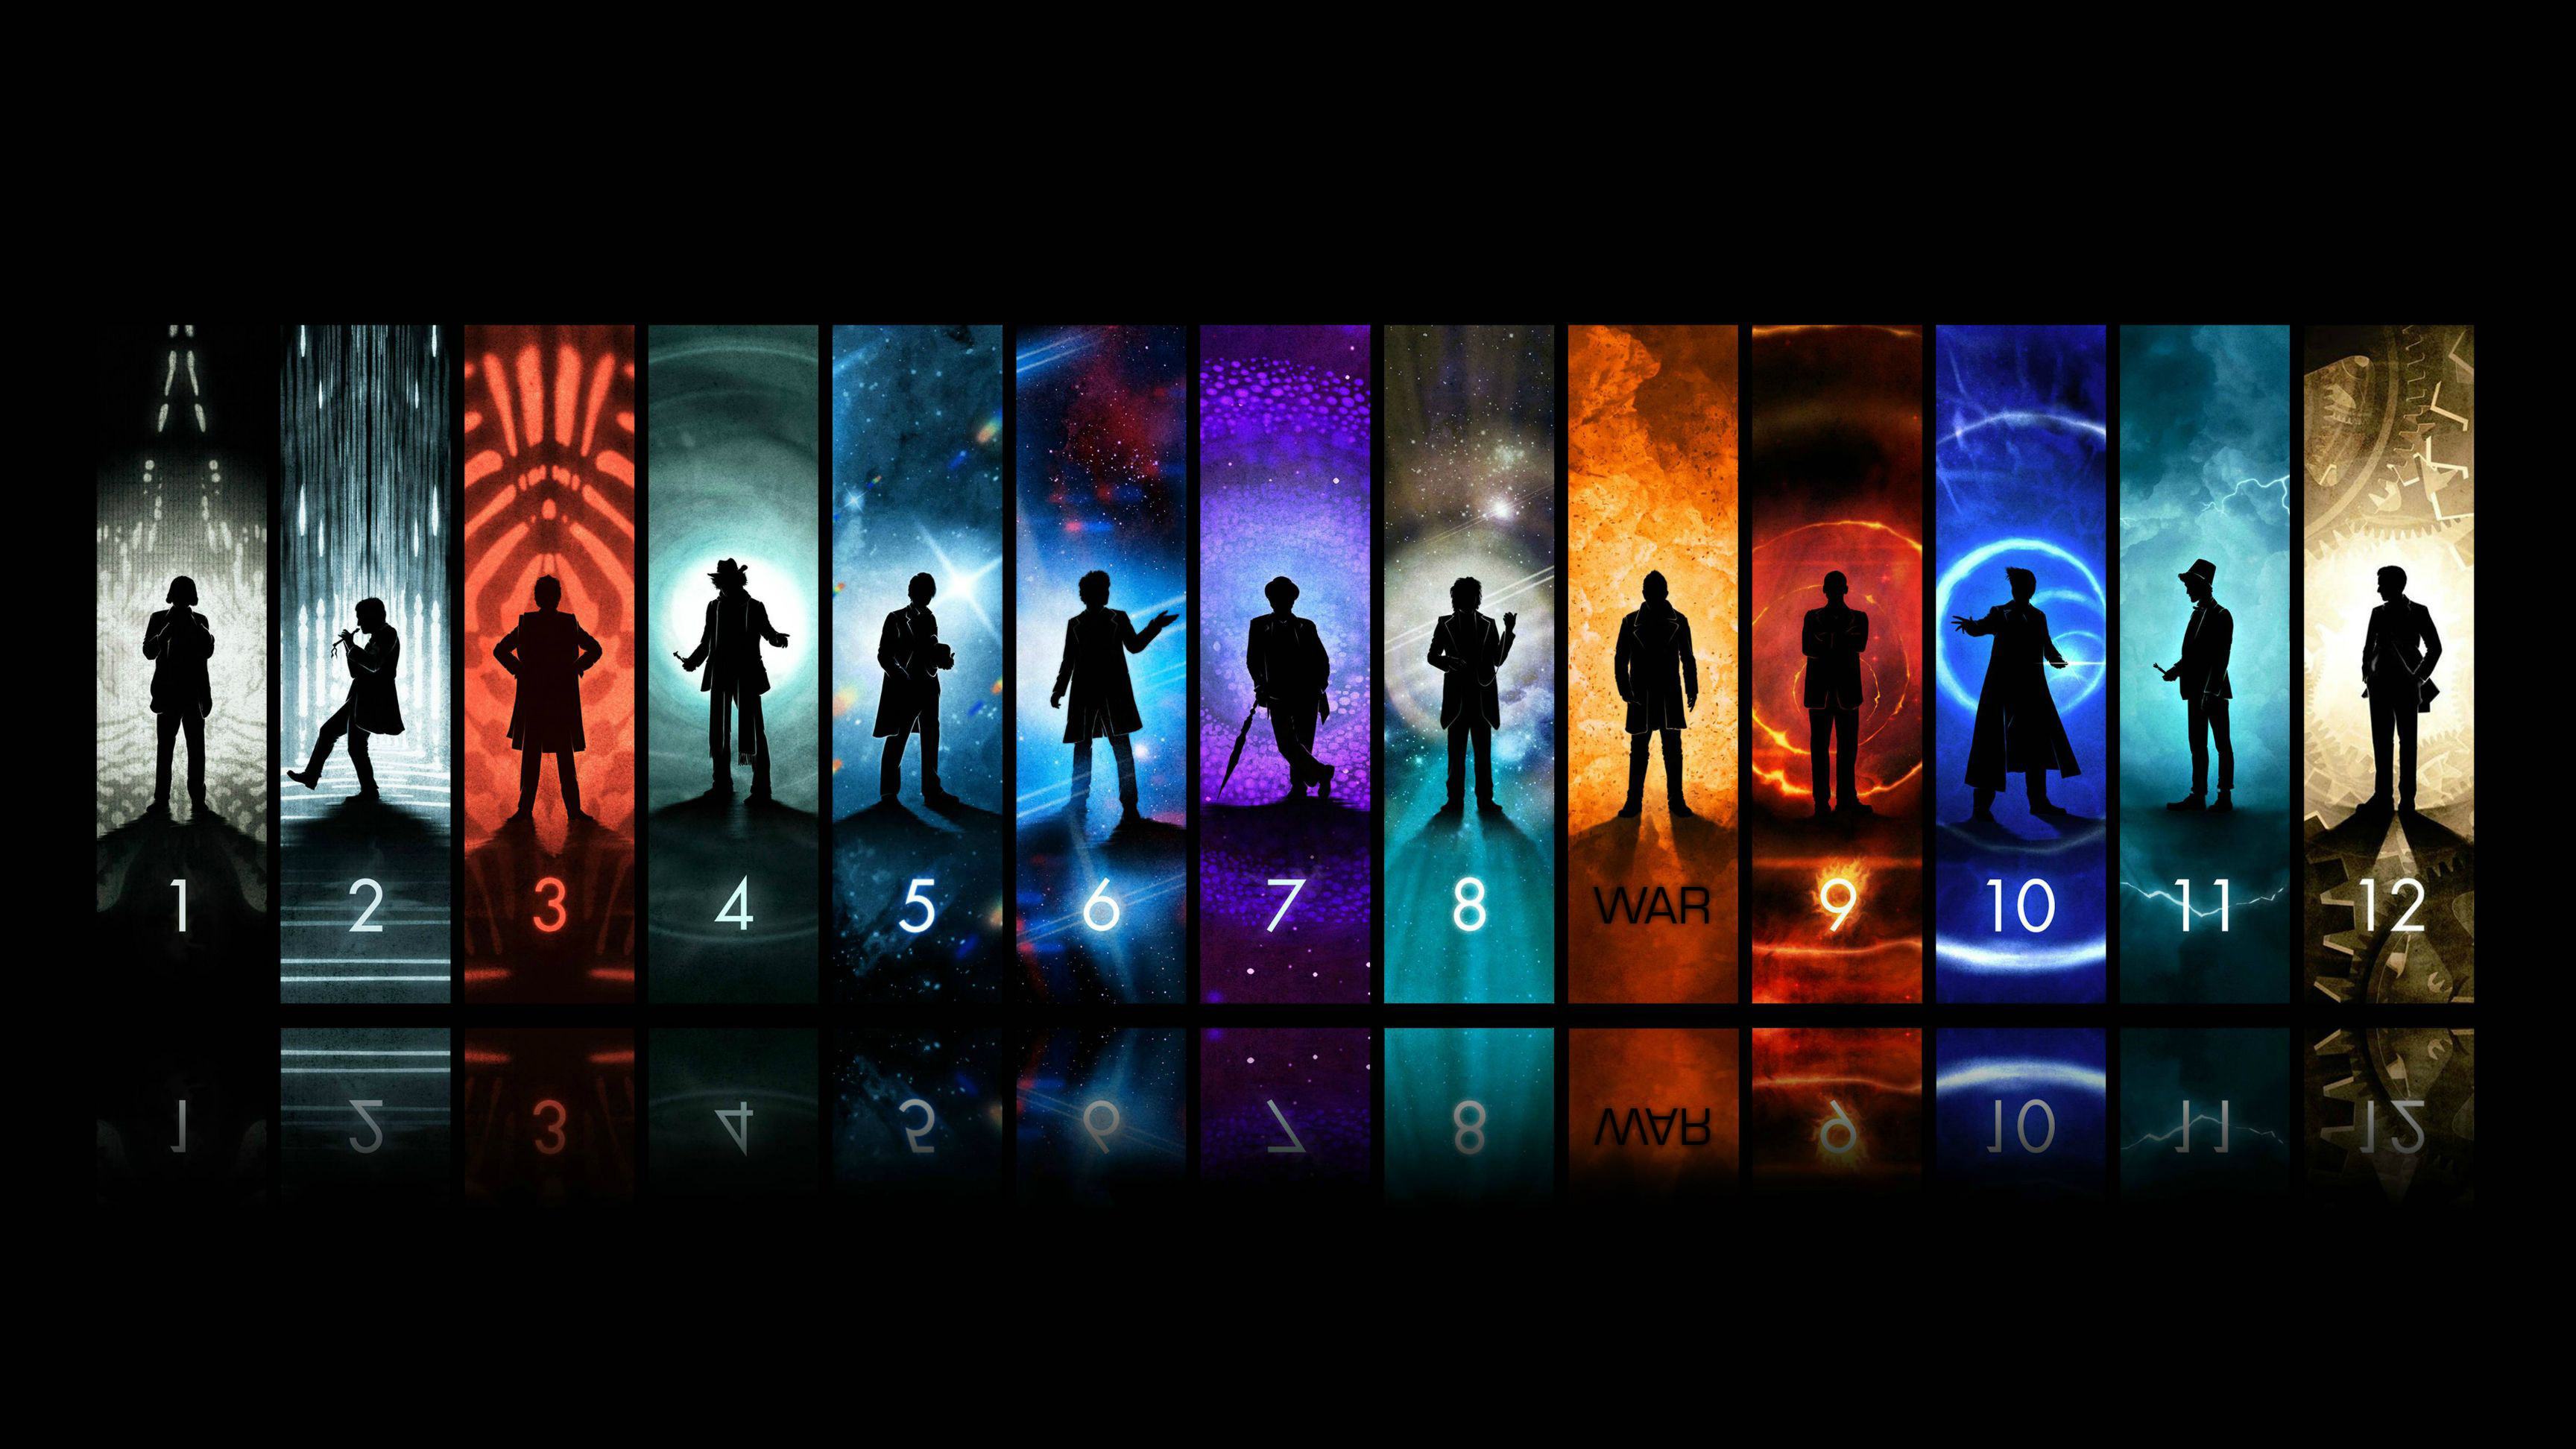 Did Of A Doctor Who Wallpaper Posted On To Alter The War